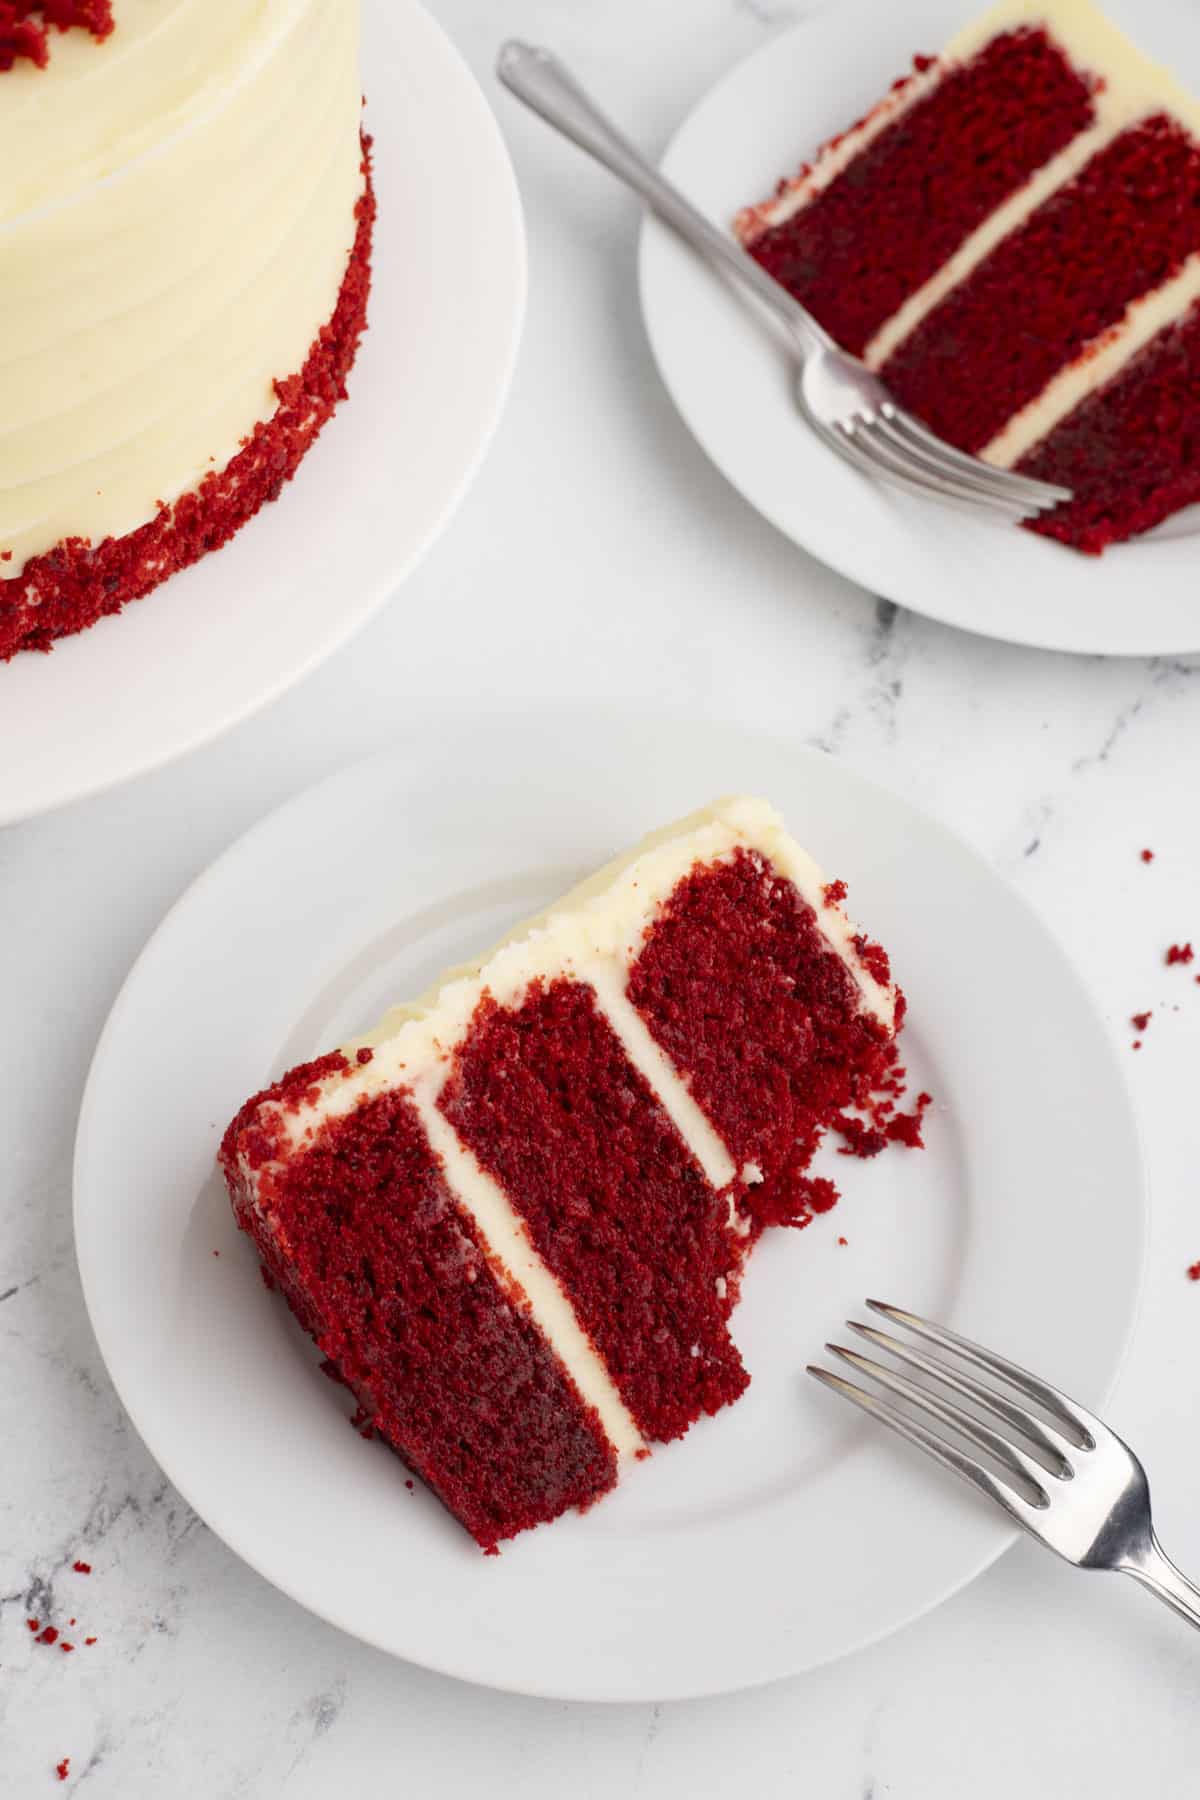 a slice of layered red velvet cake on a white plate with a fork leaning on it and another plate with a slice of cake and the edge of the whole cake in the background